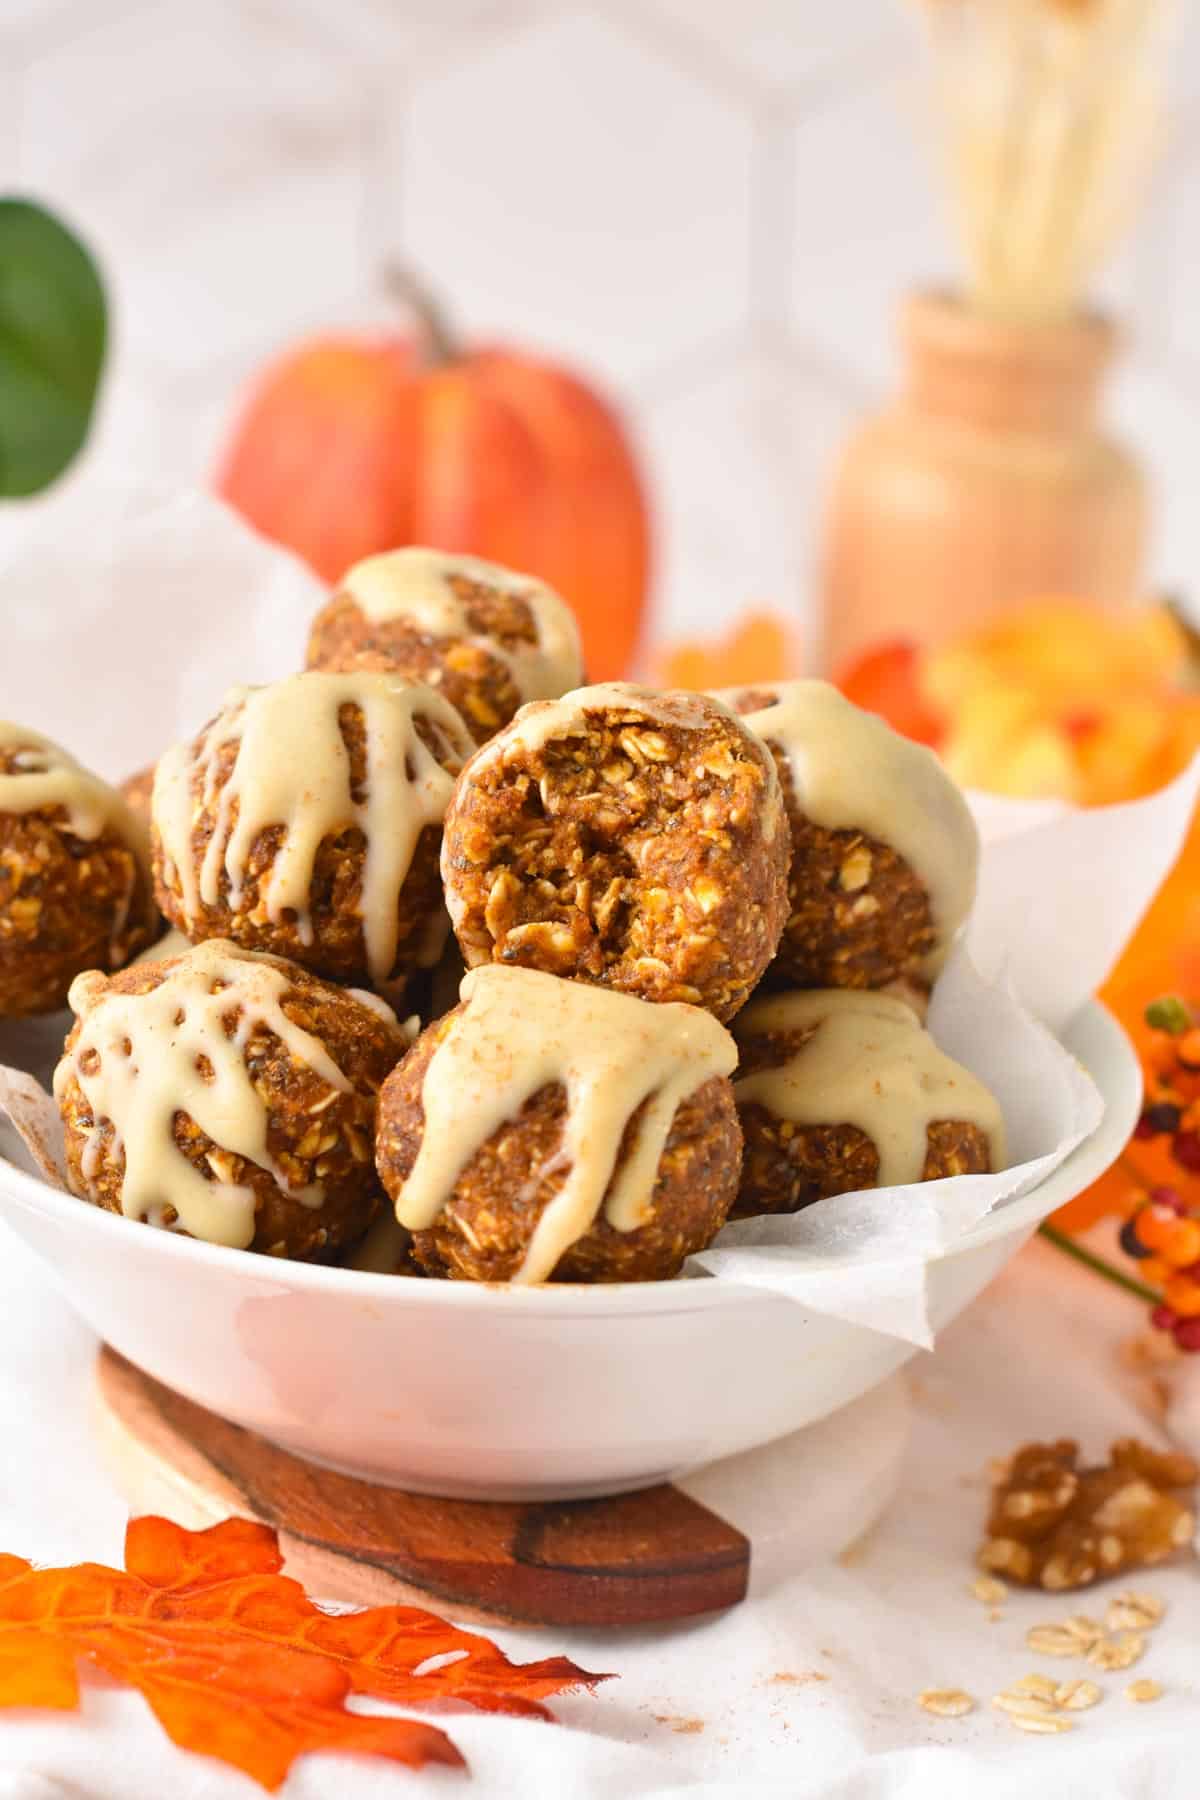 A bowl filled with no bake Pumpkin Energy Balls decorated with a drizzle of white chocolate on top.